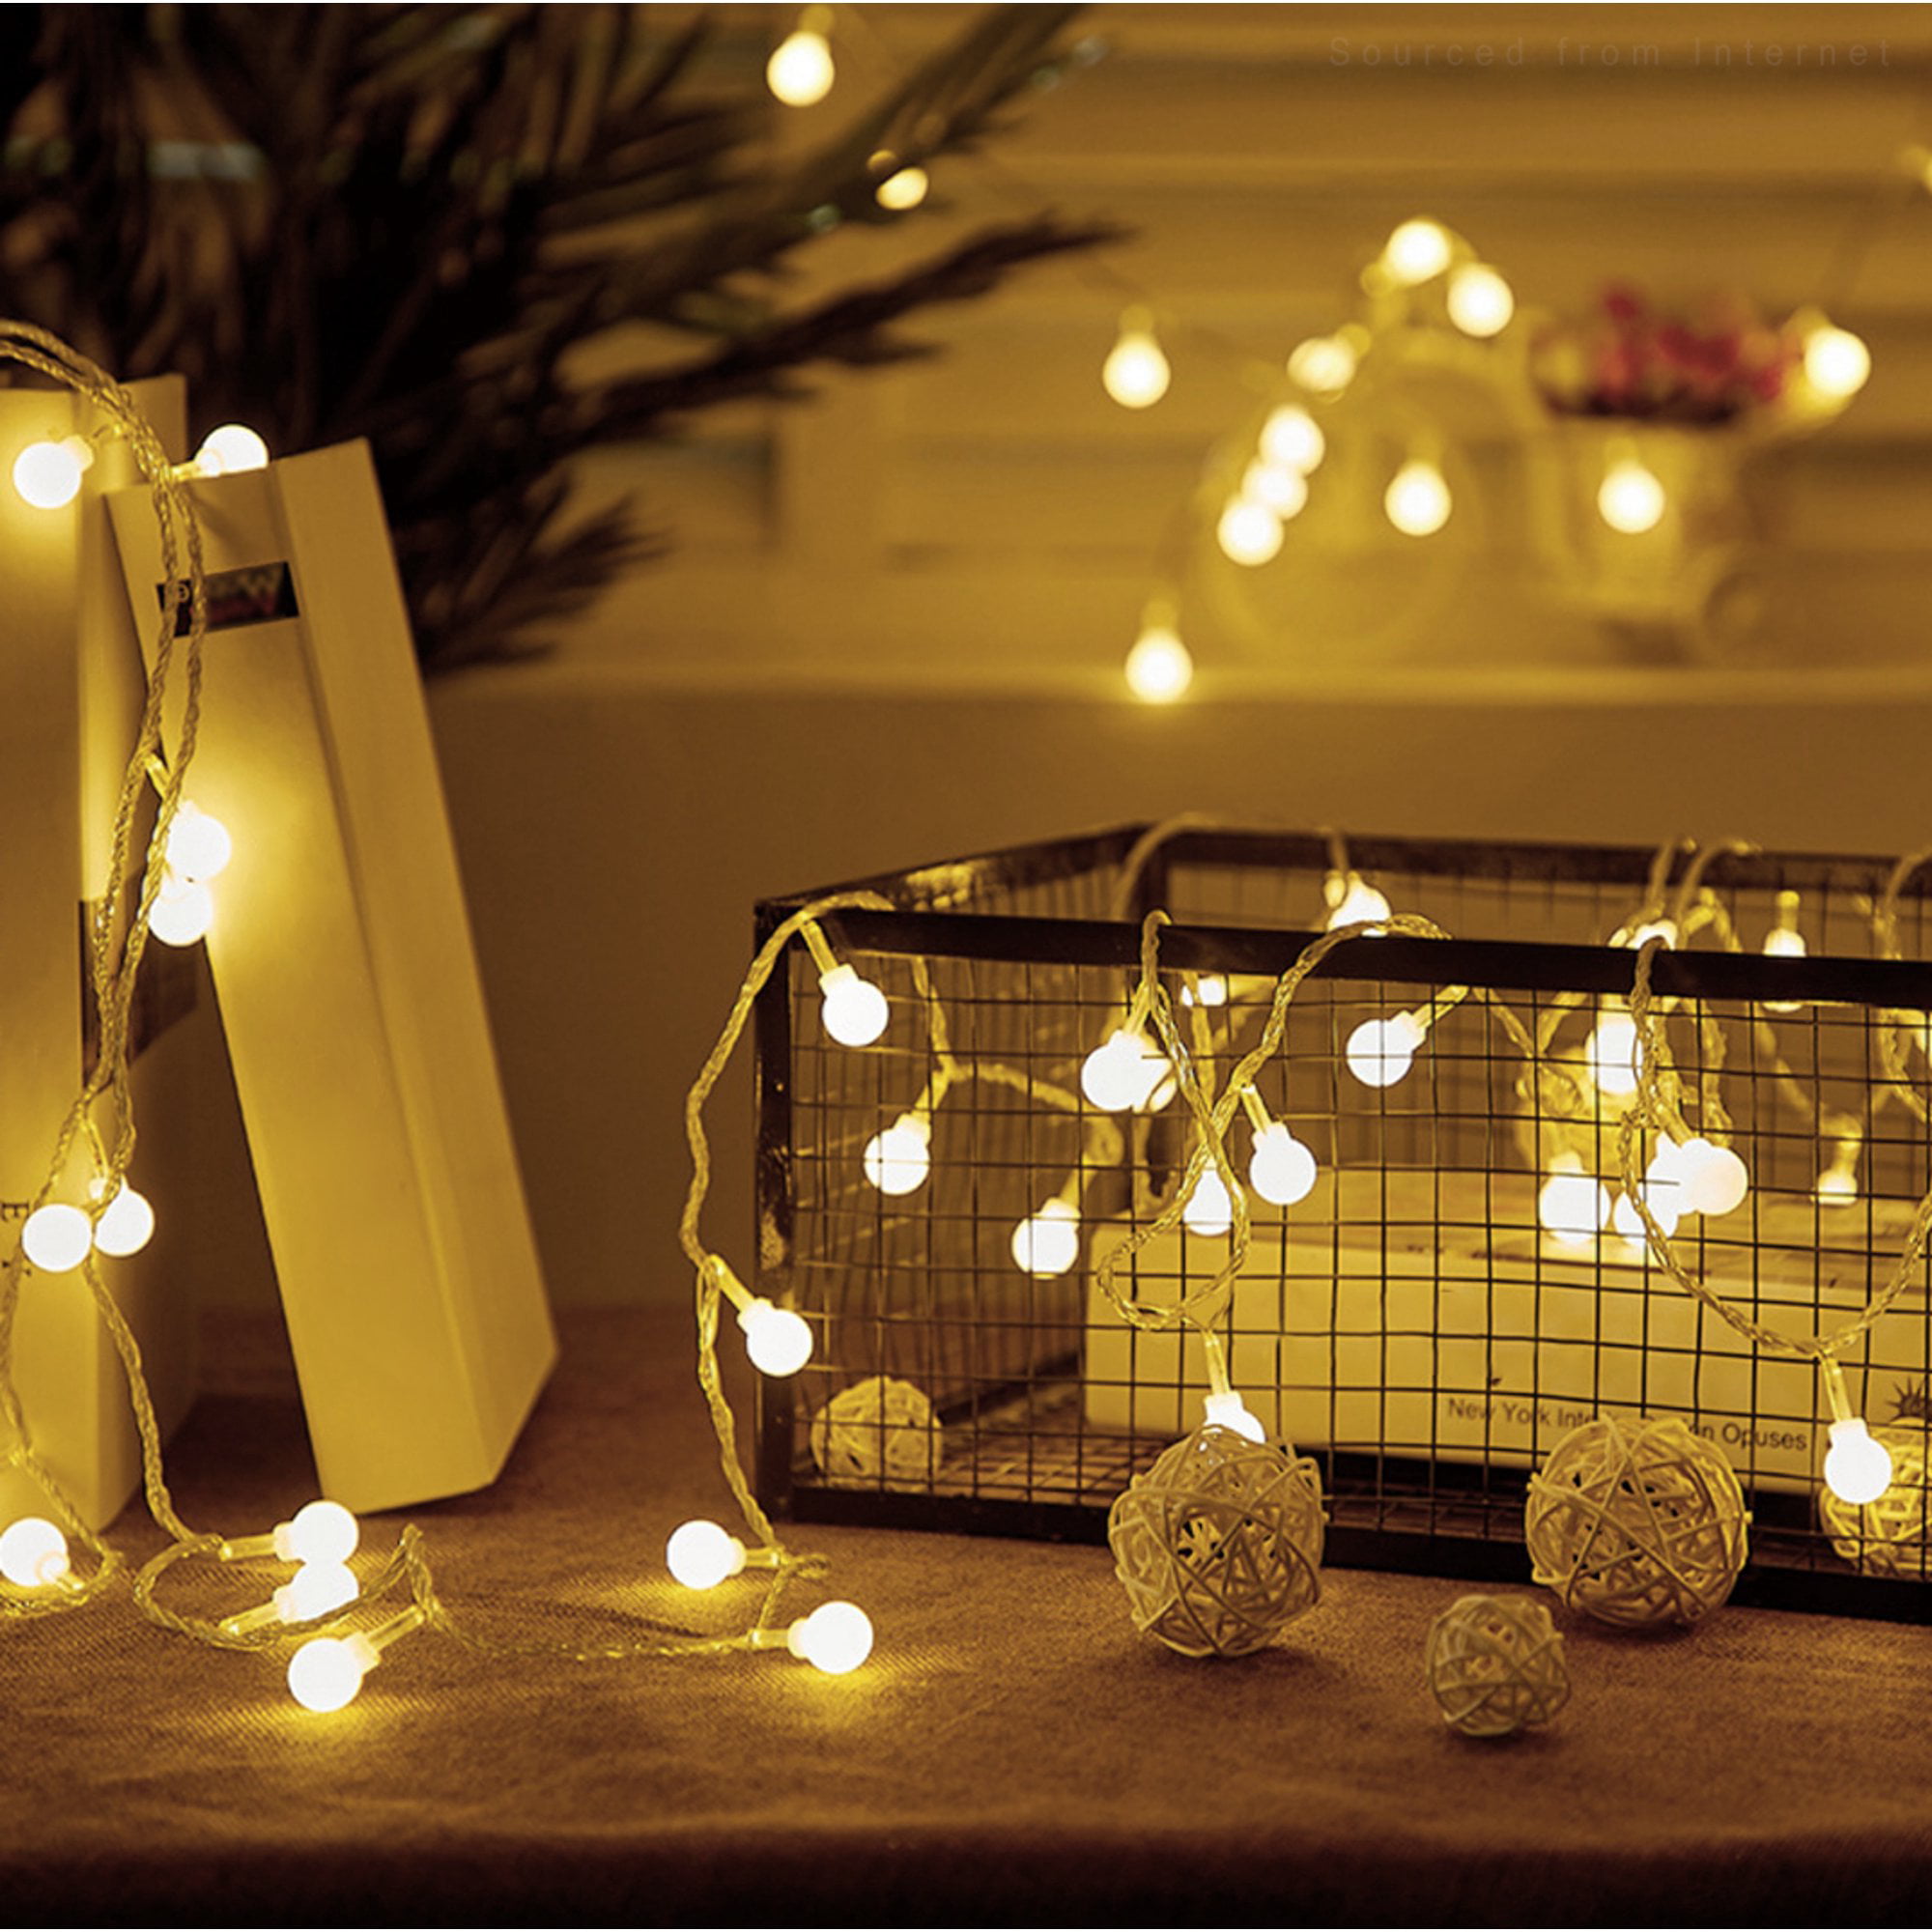 TorchStar 20ft 8-modes Battery Operated Fairy LED Wire String Lights Warm White 